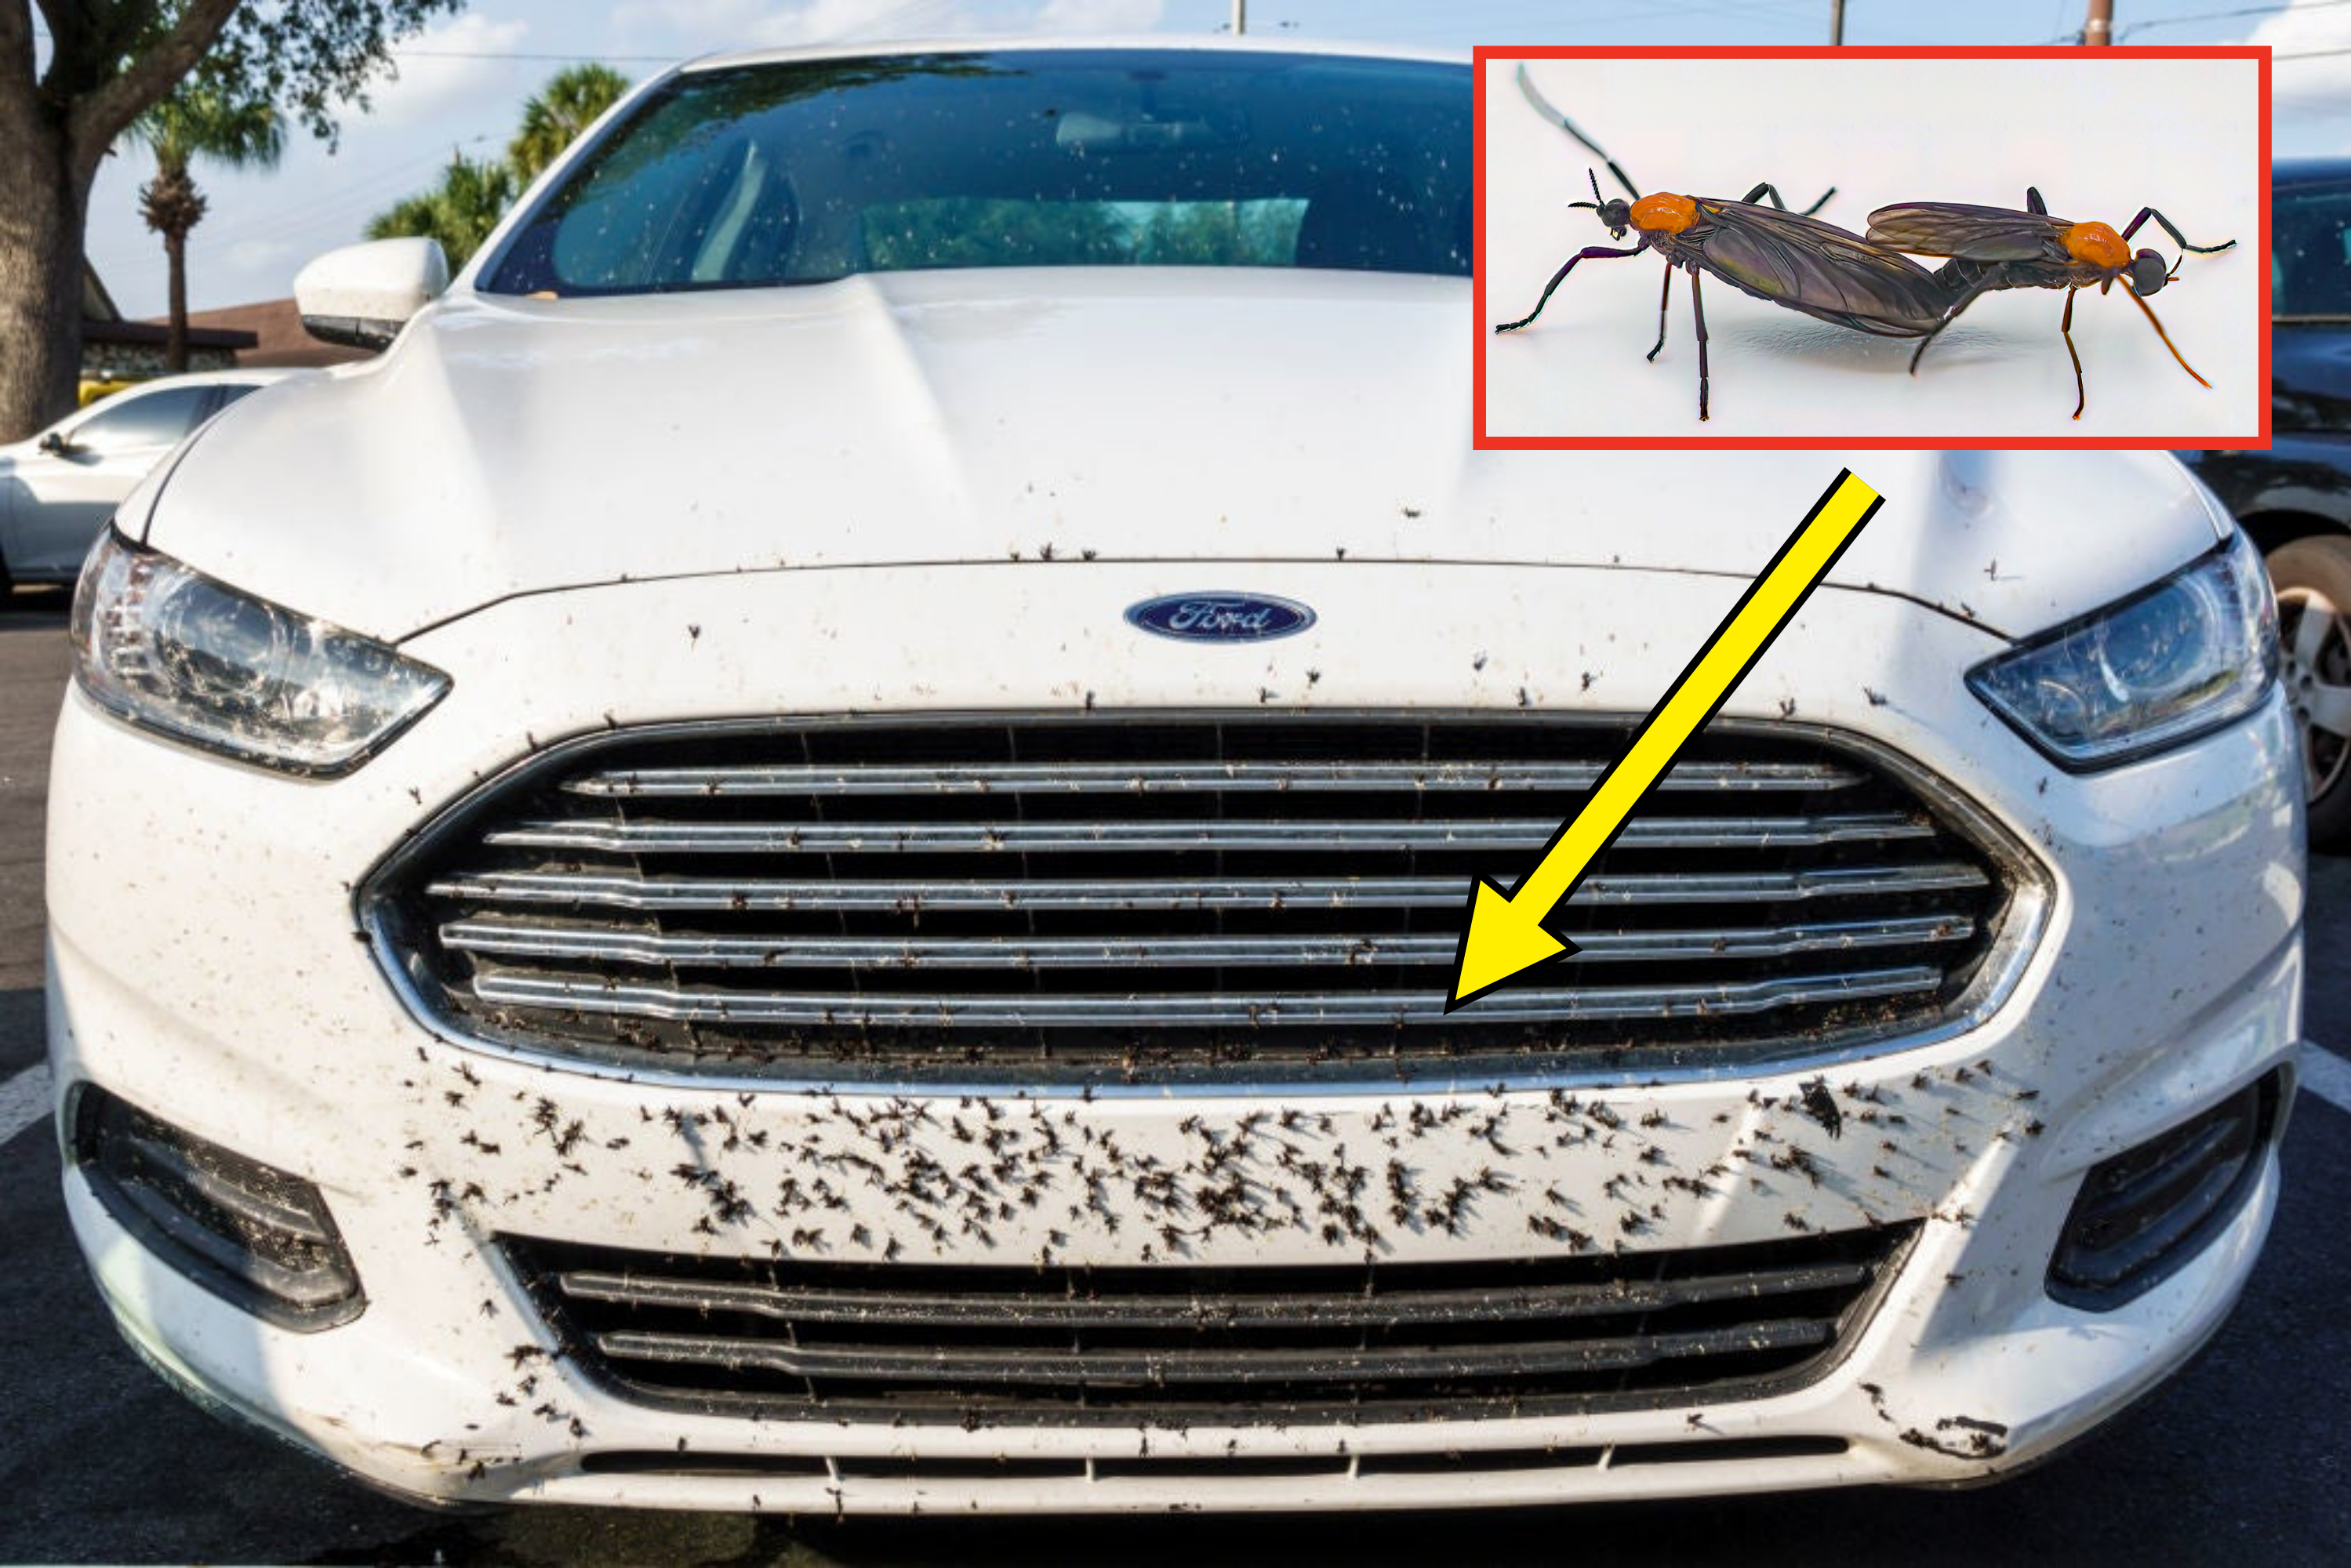 large bugs on the front grill of a car